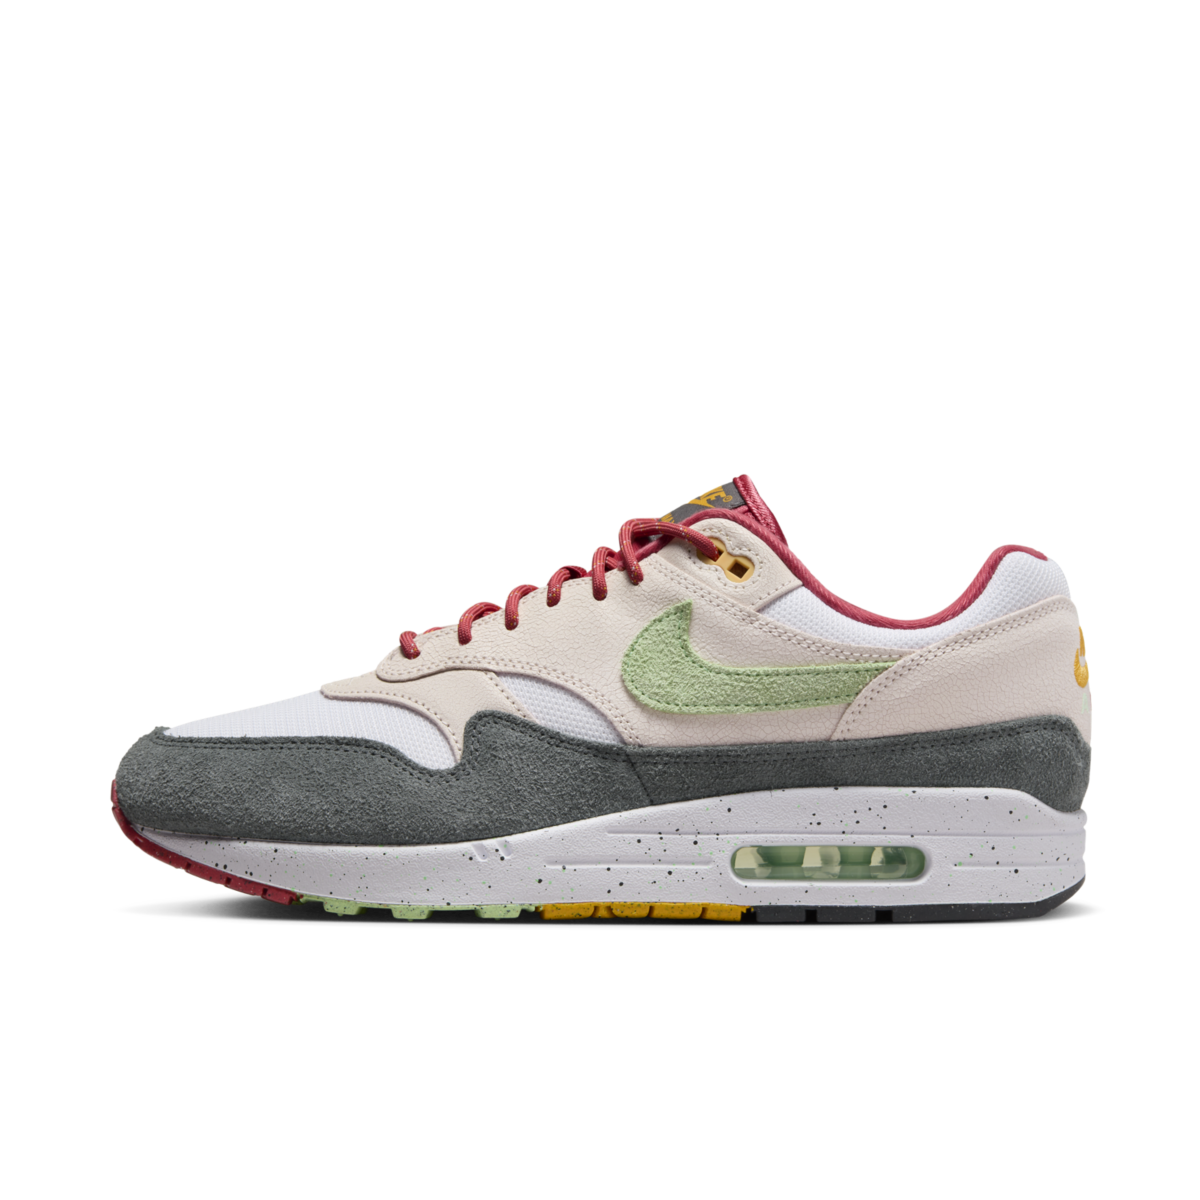 Air Max 1 "Cracked Multi-Color"